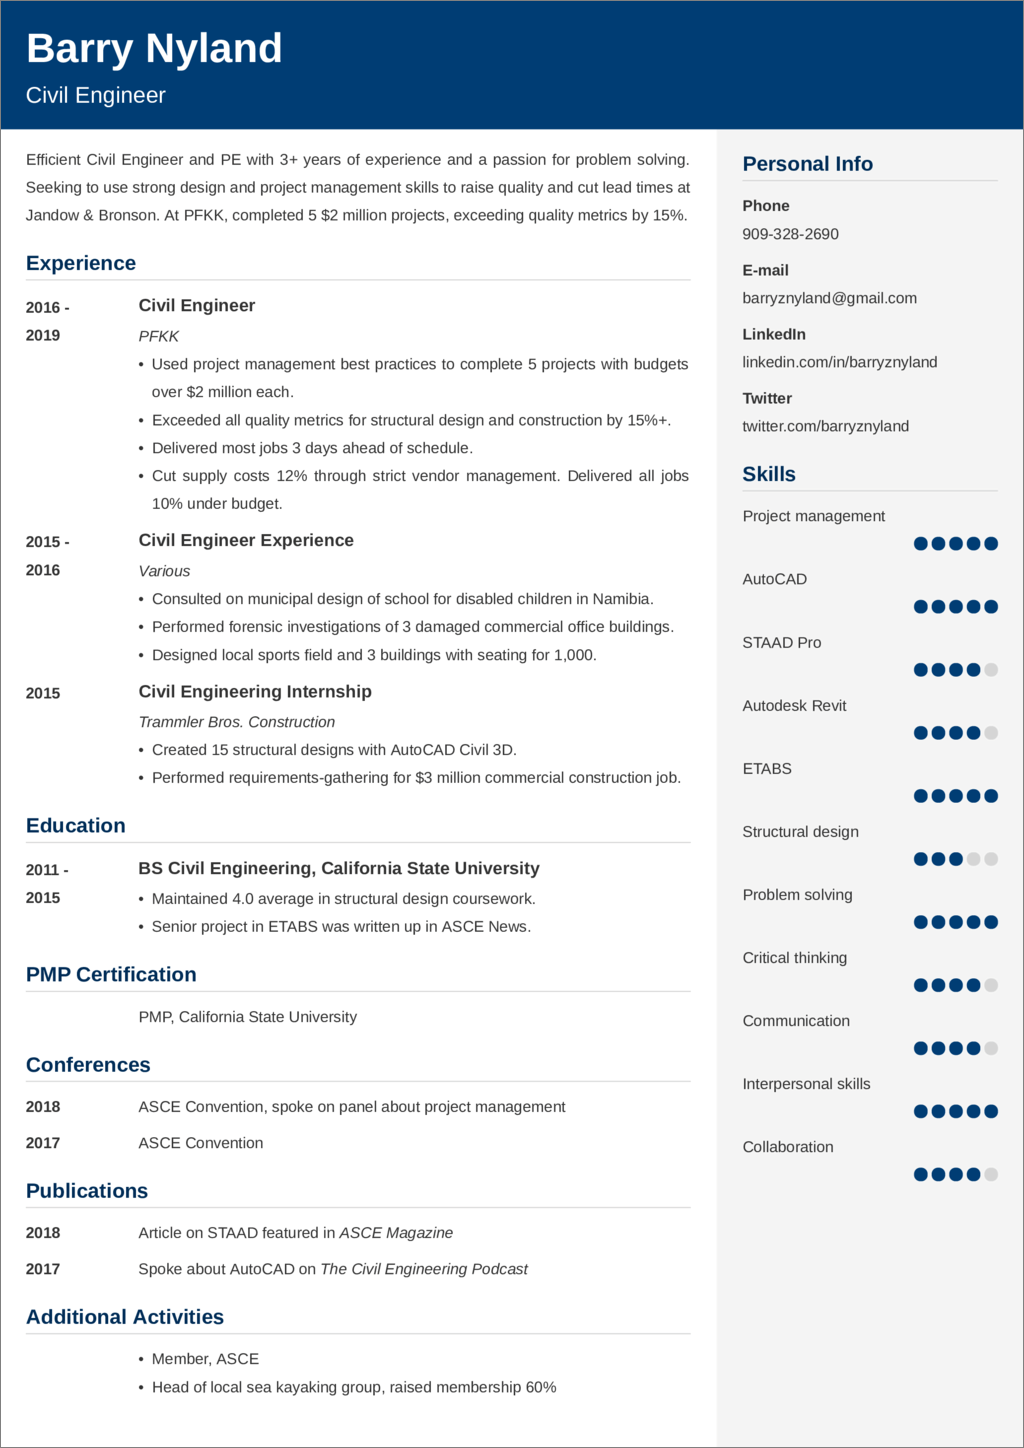 Civil Engineer CV Sample—20+ Examples and Writing Tips